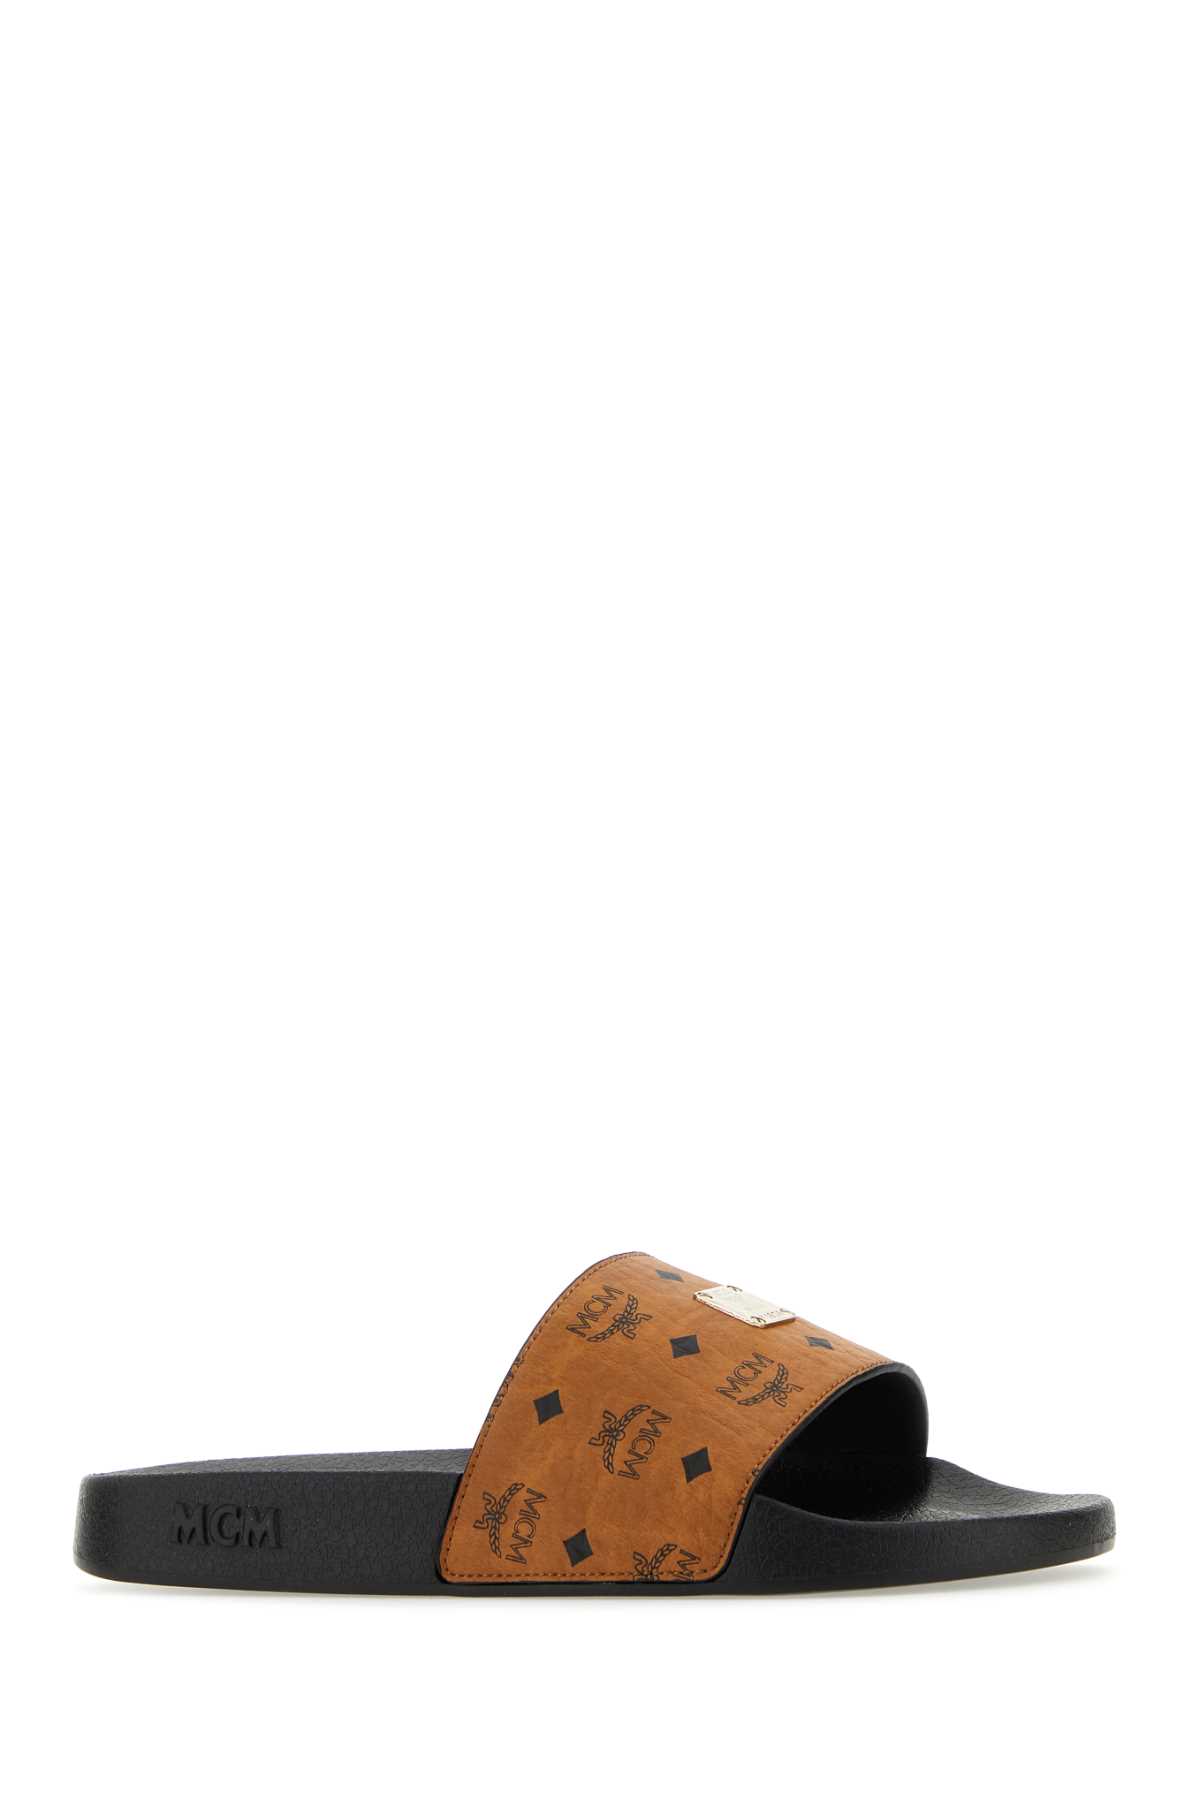 Mcm Printed Canvas Slippers In Co